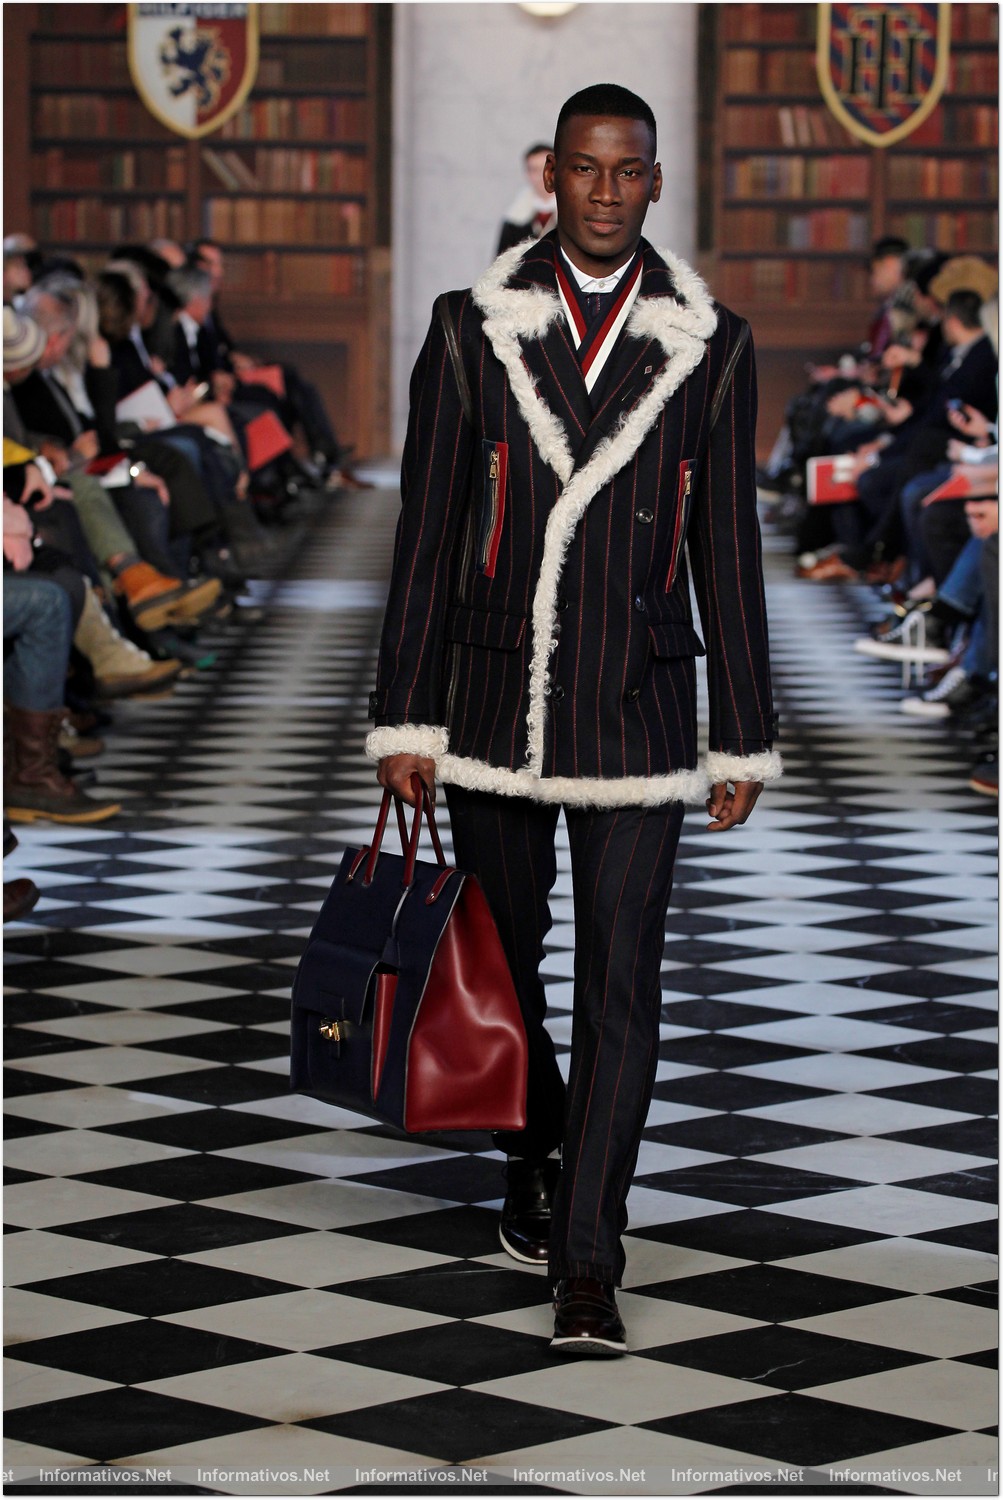 NY08FEB013.- Desfile Tommy Hilfiger Fall 2013 Men's Collection. 24. DAVID